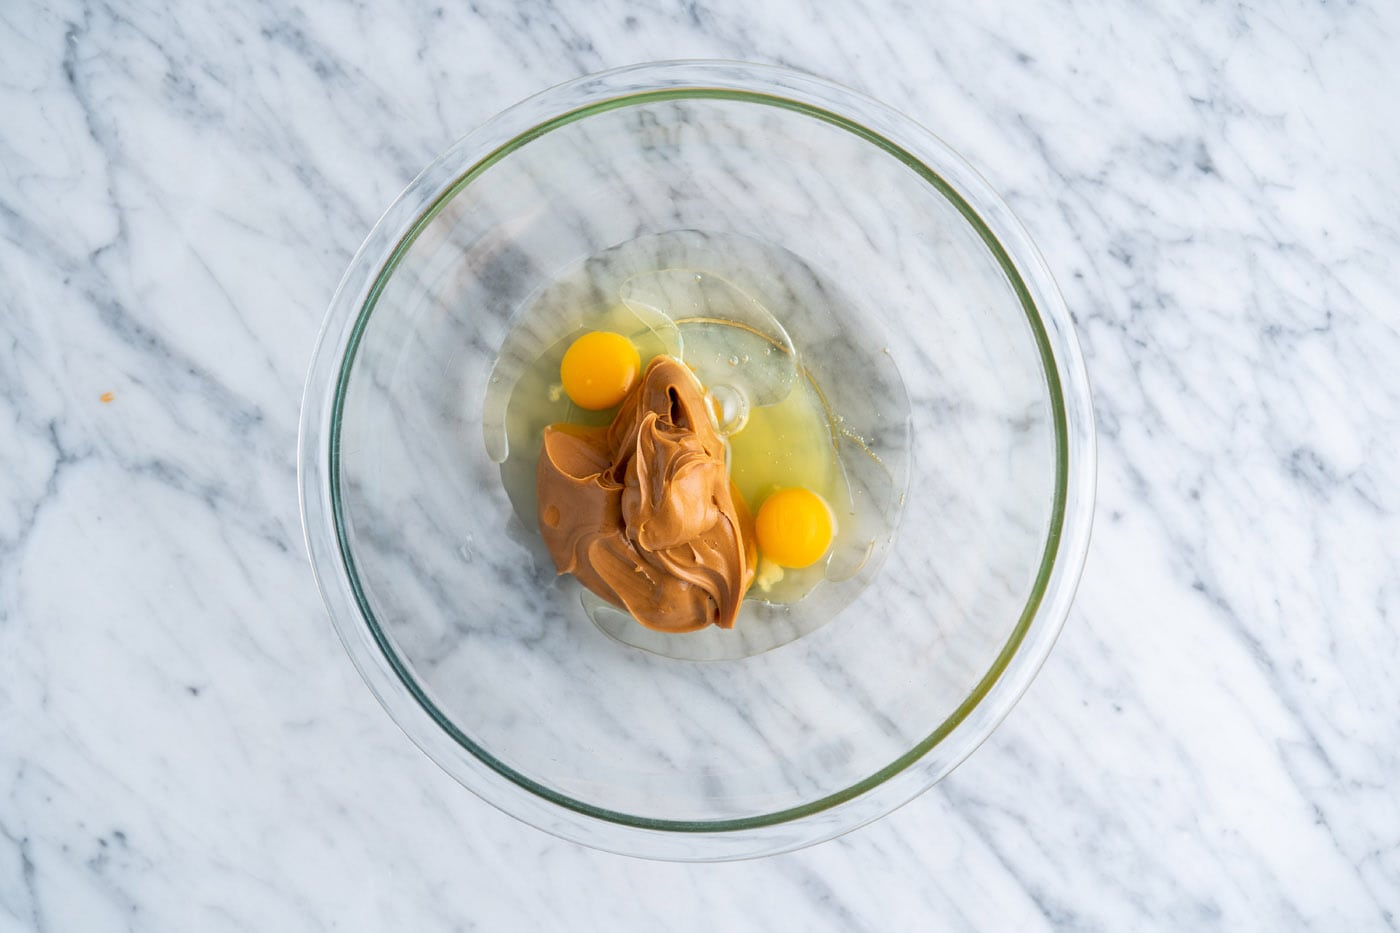 eggs, peanut butter, and oil in a bowl